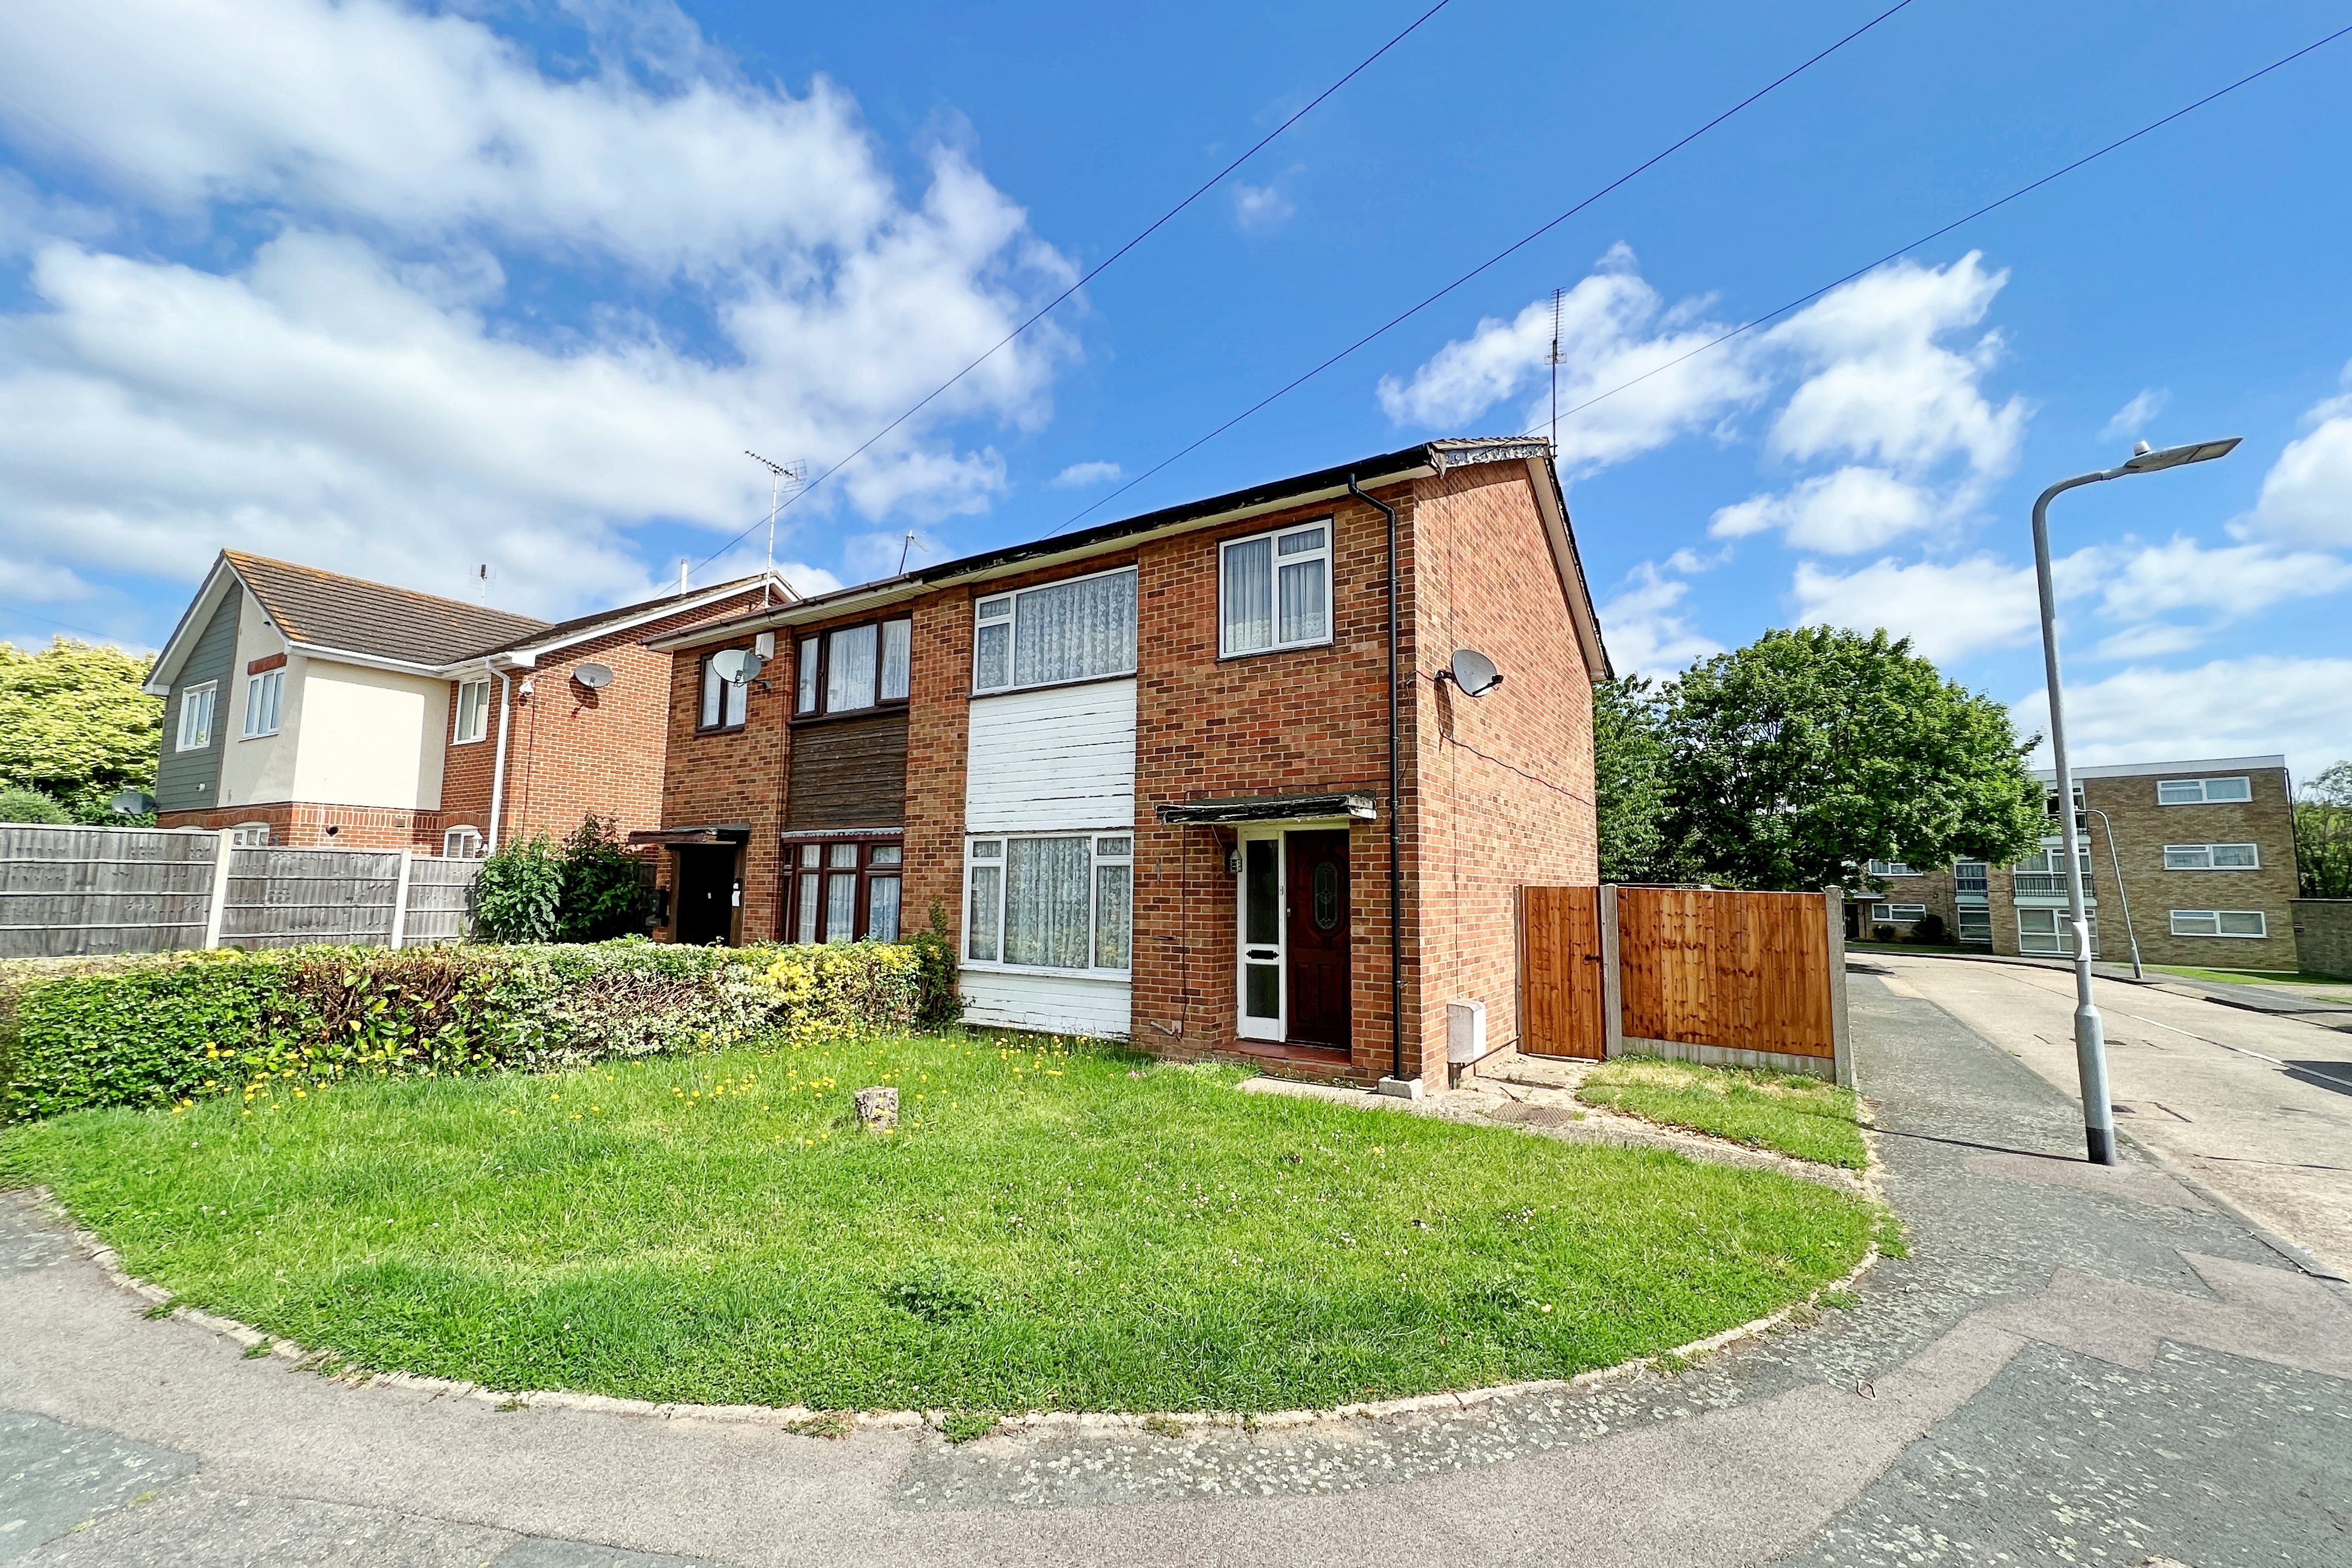 3 bed semi-detached house for sale in St Lawrence Gardens , Eastwood - Property Image 1